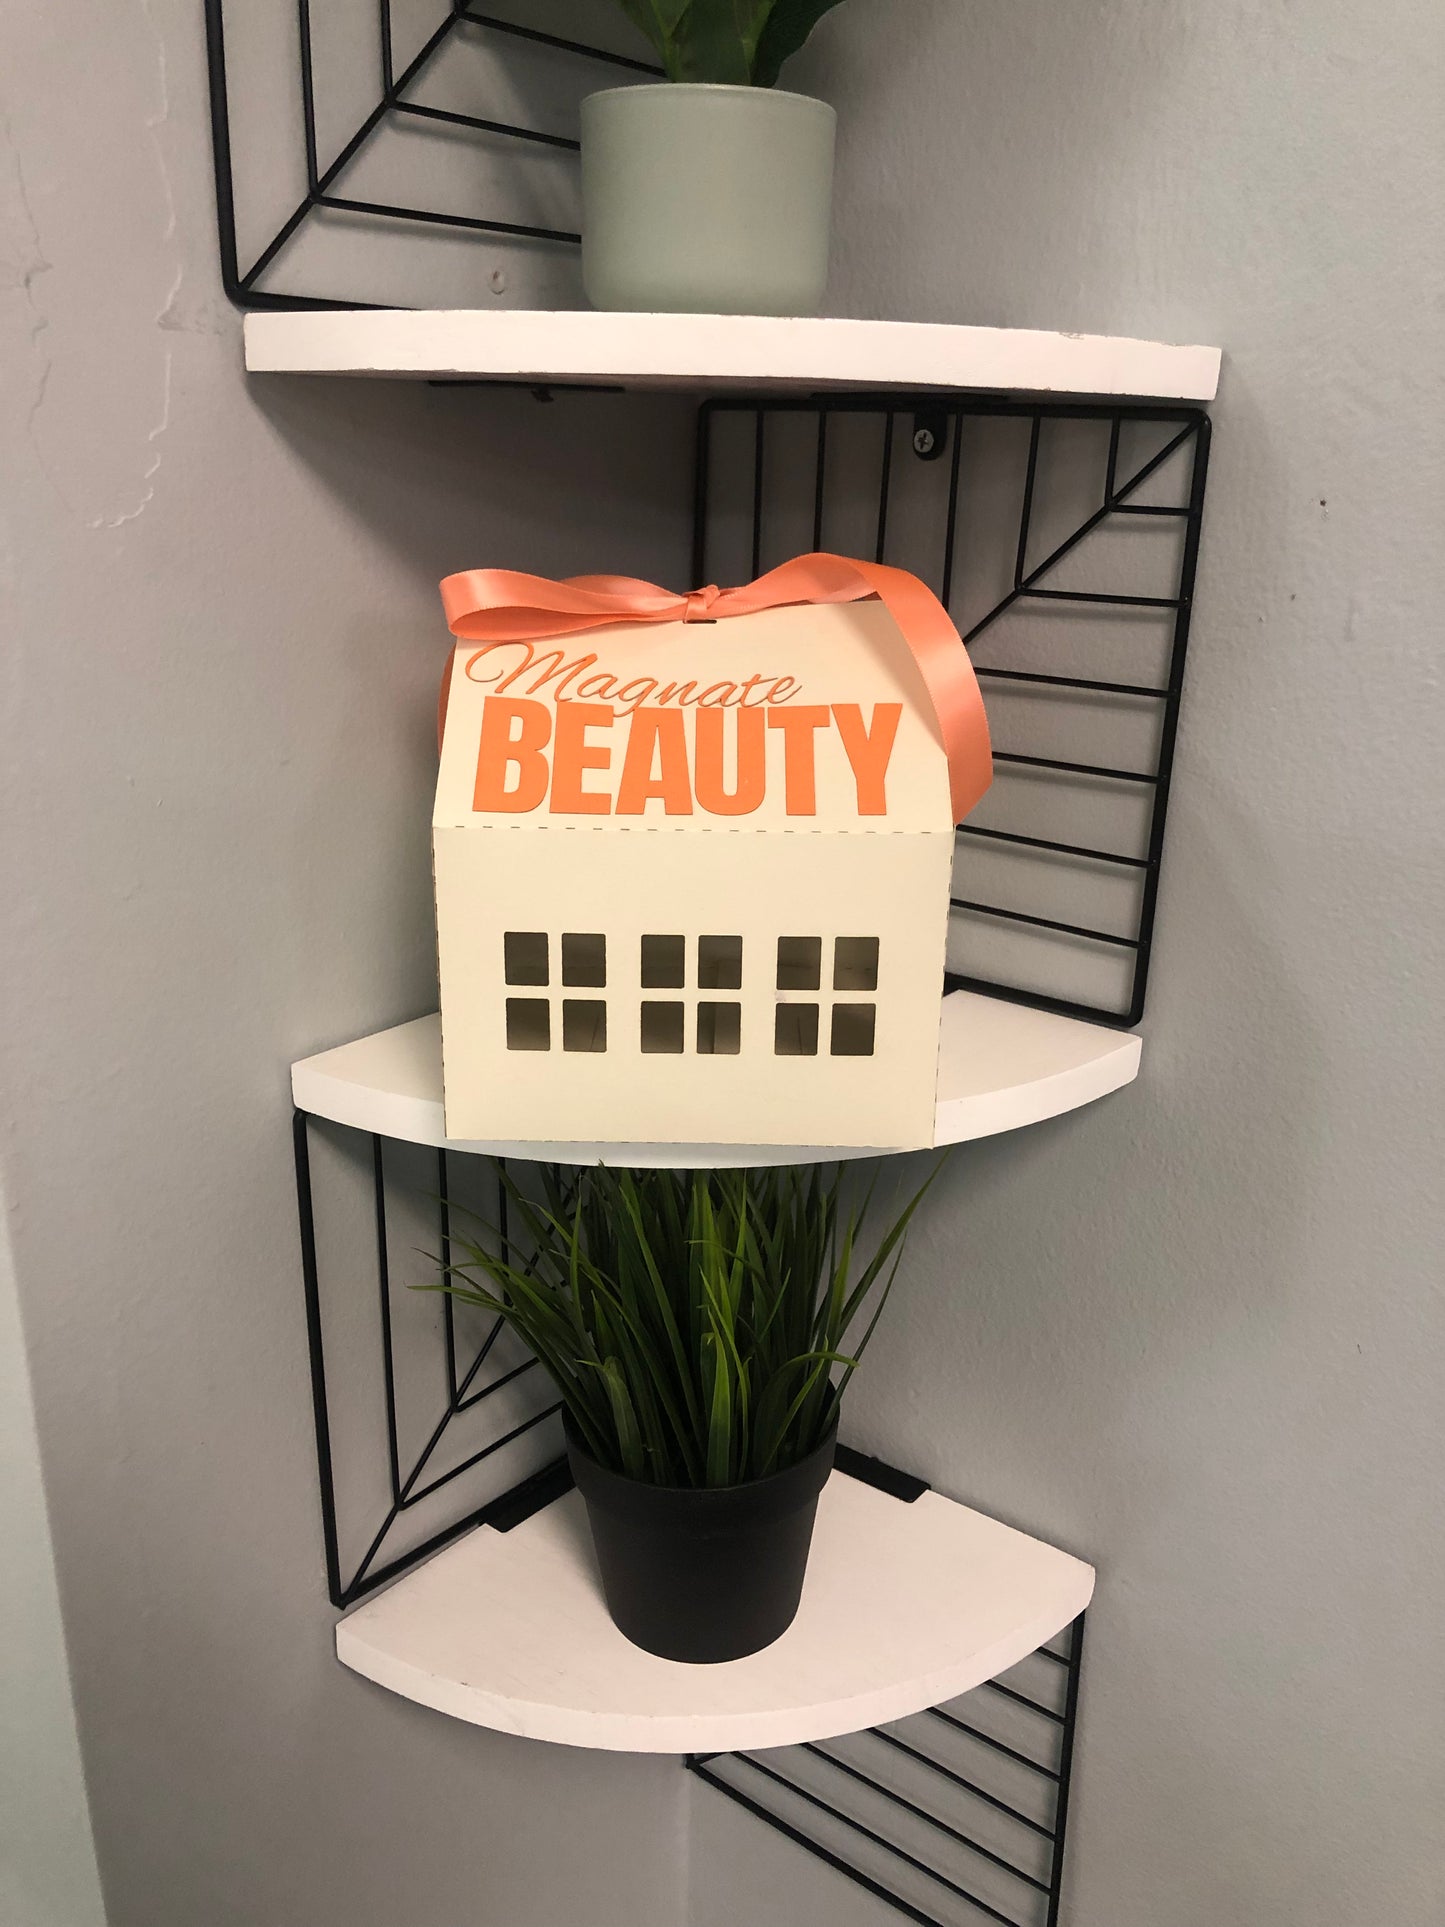 Real Estate Gift - Magnate Beauty